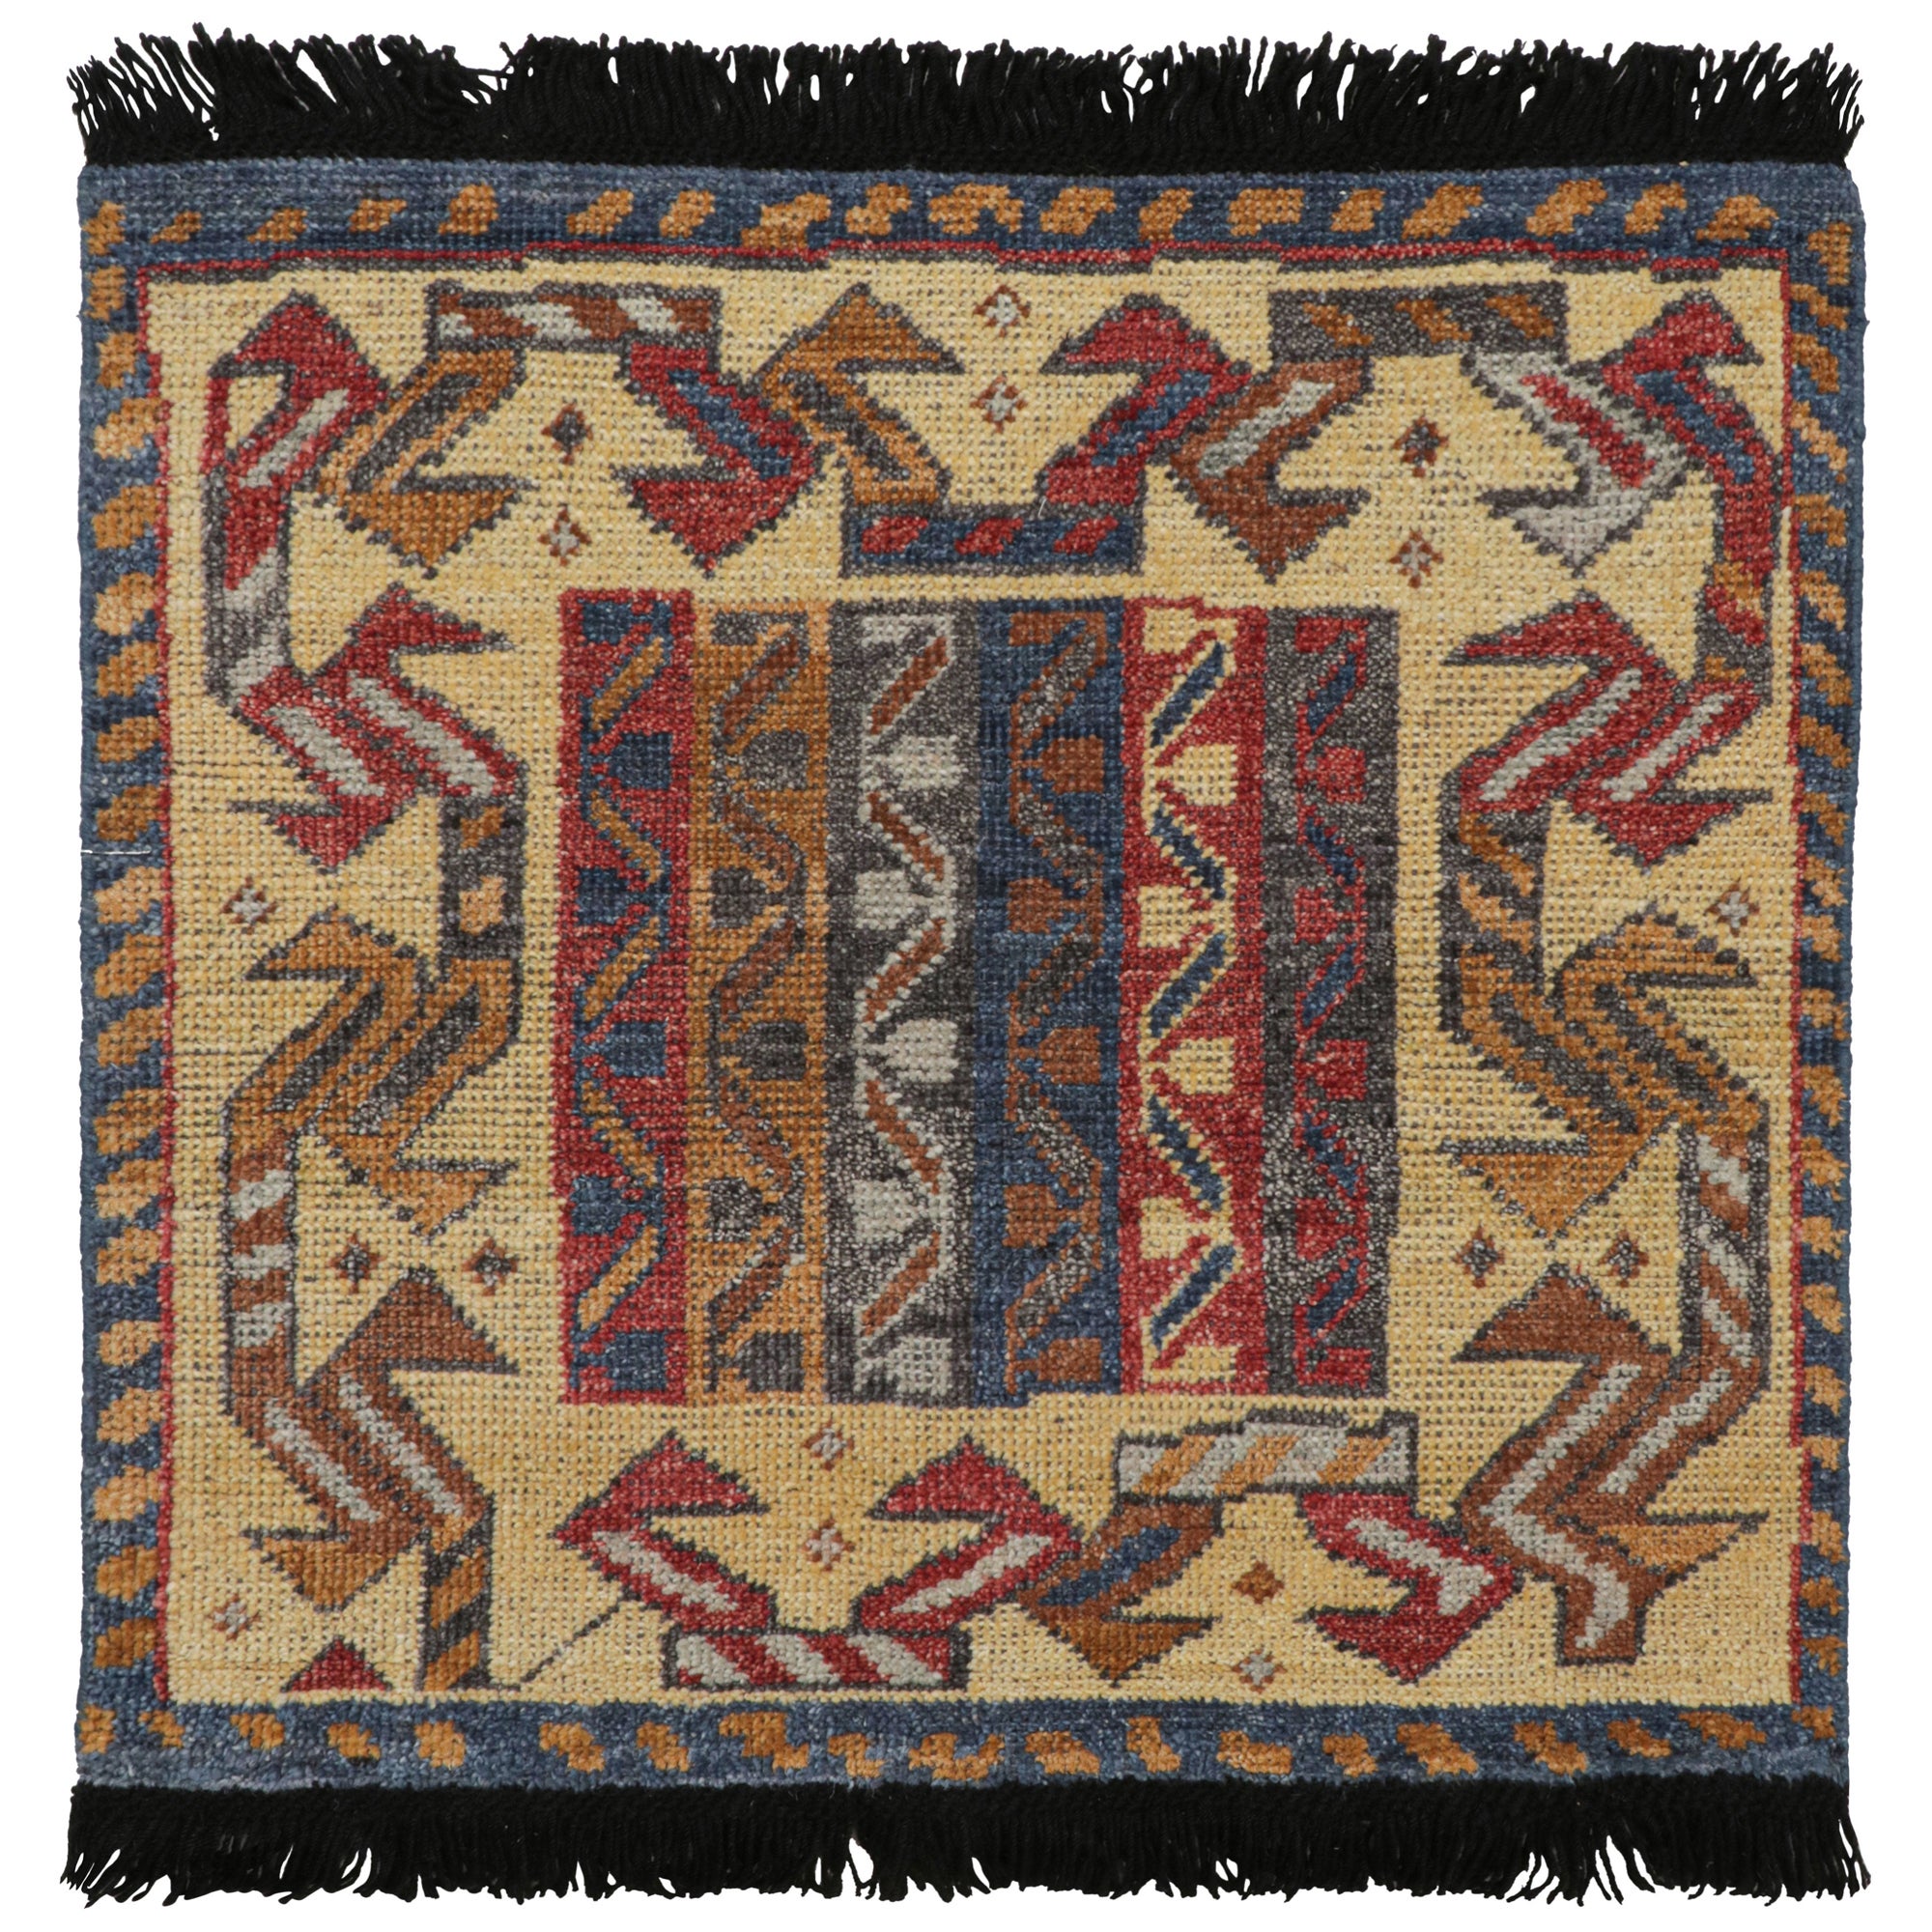 Rug & Kilim’s Tribal Style Square Scatter Rug with Geometric Patterns 